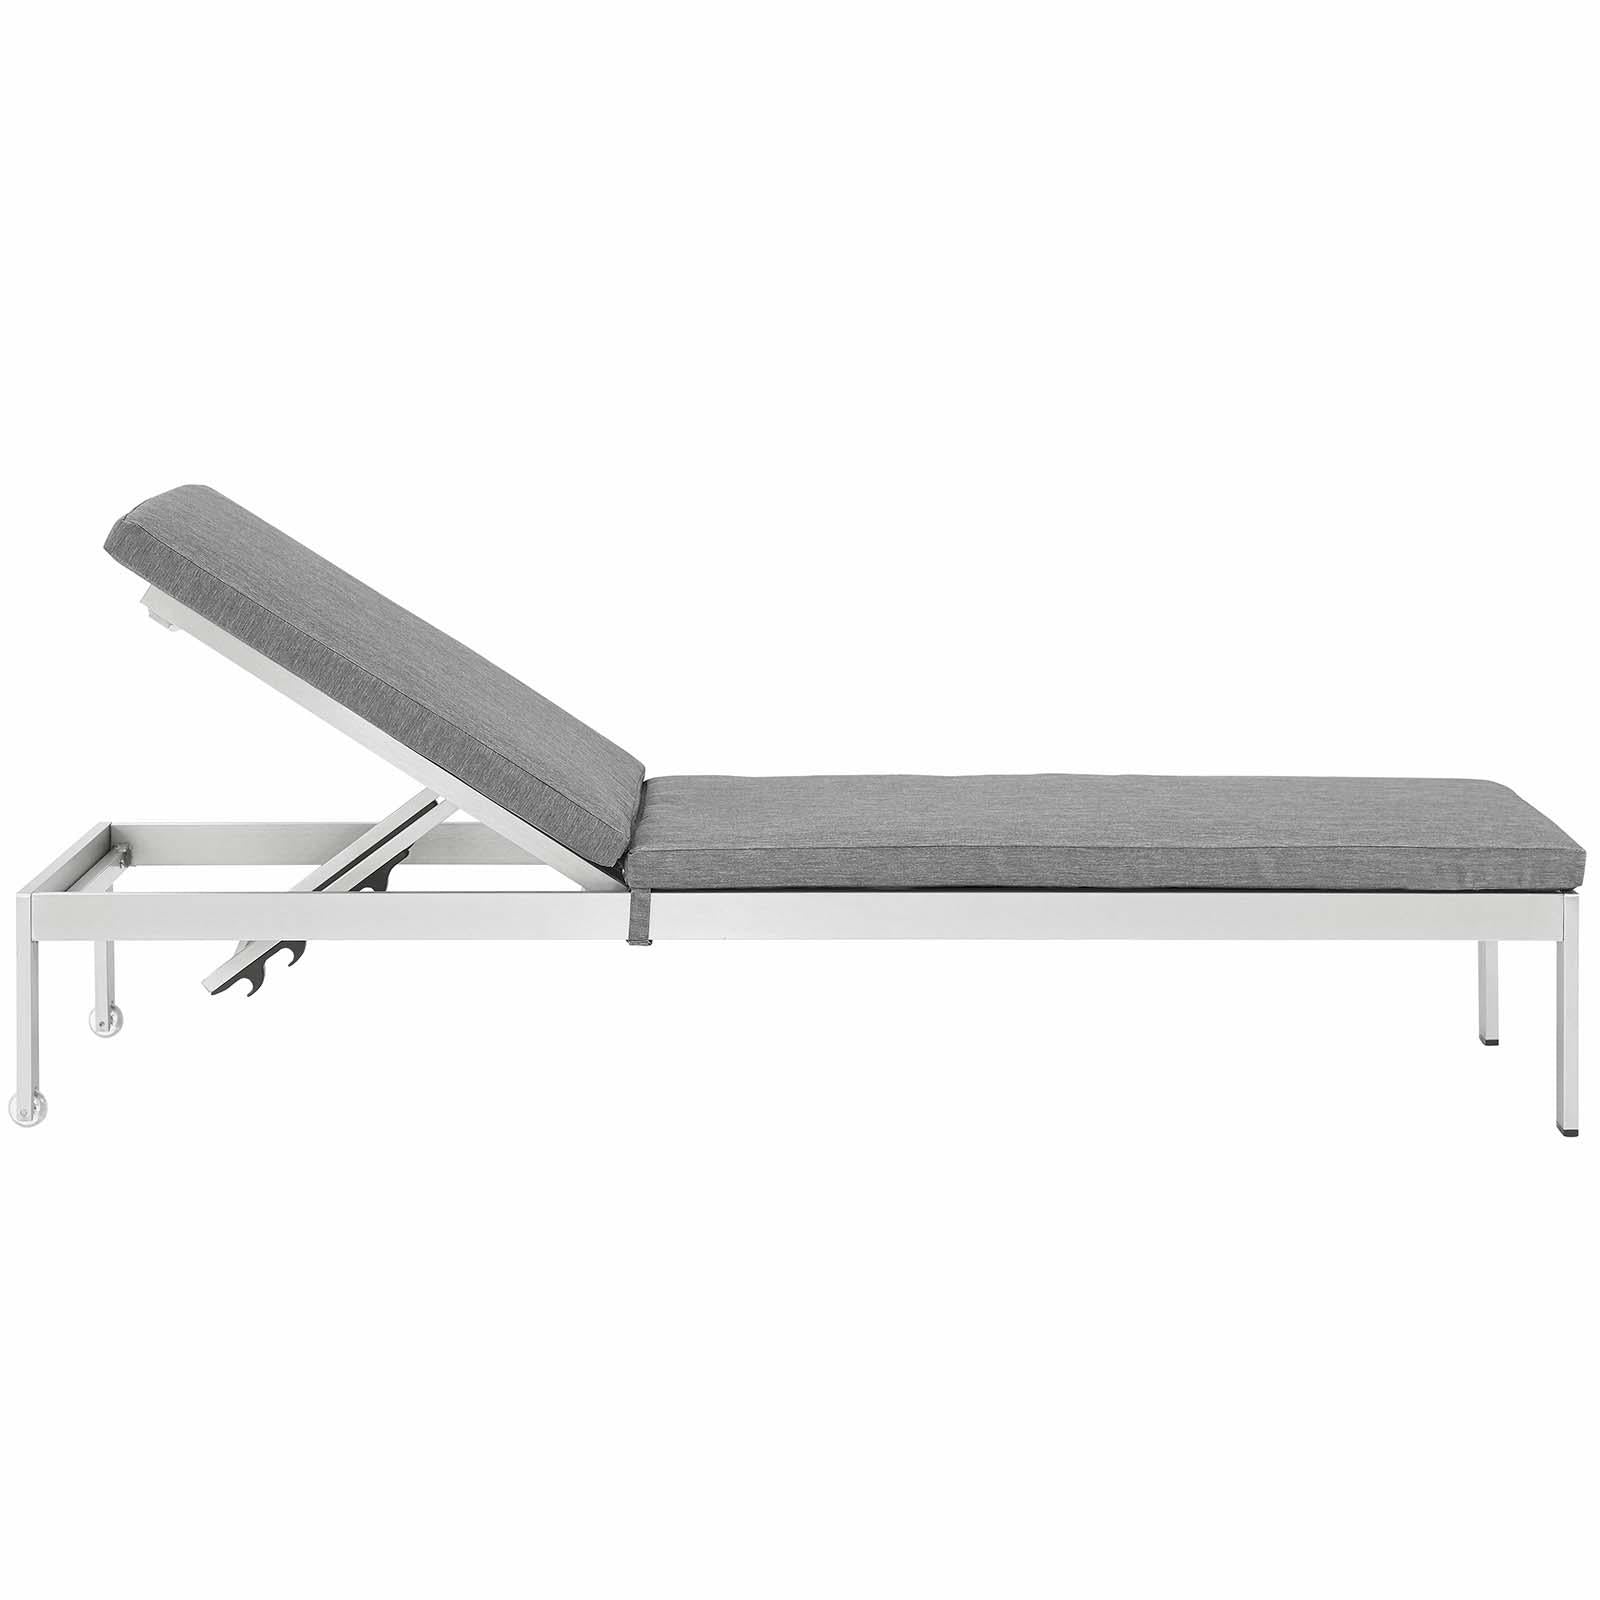 Modway Furniture Modern Shore Outdoor Patio Aluminum Chaise with Cushions - EEI-5547